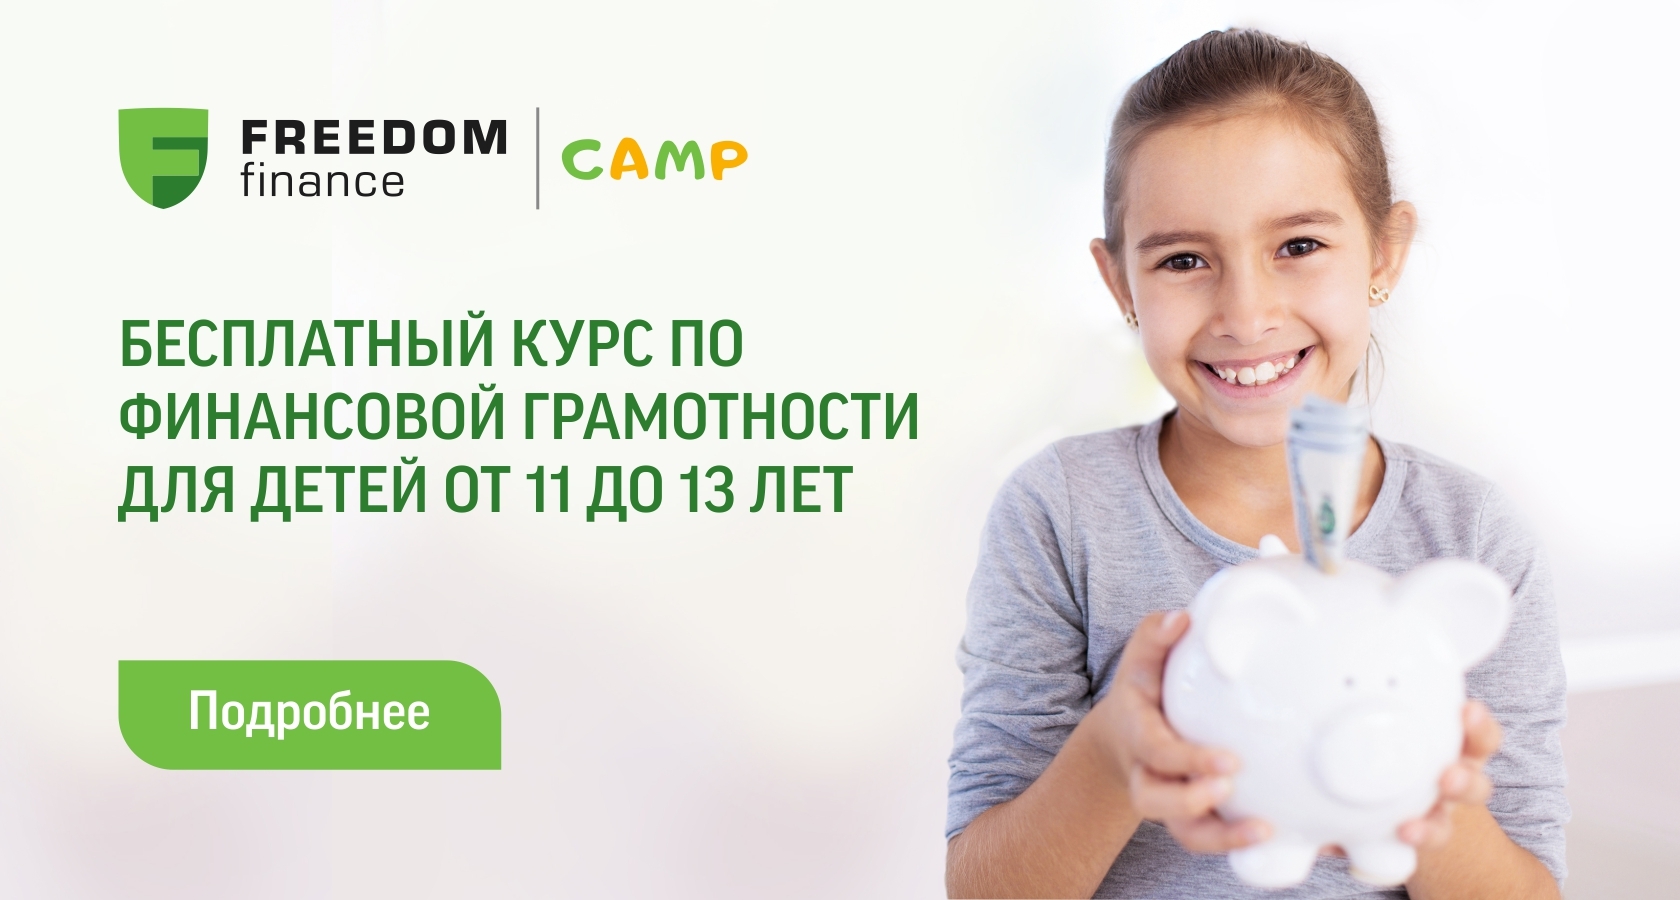 LIC Freedom Finance Life launches free camp on financial literacy for children